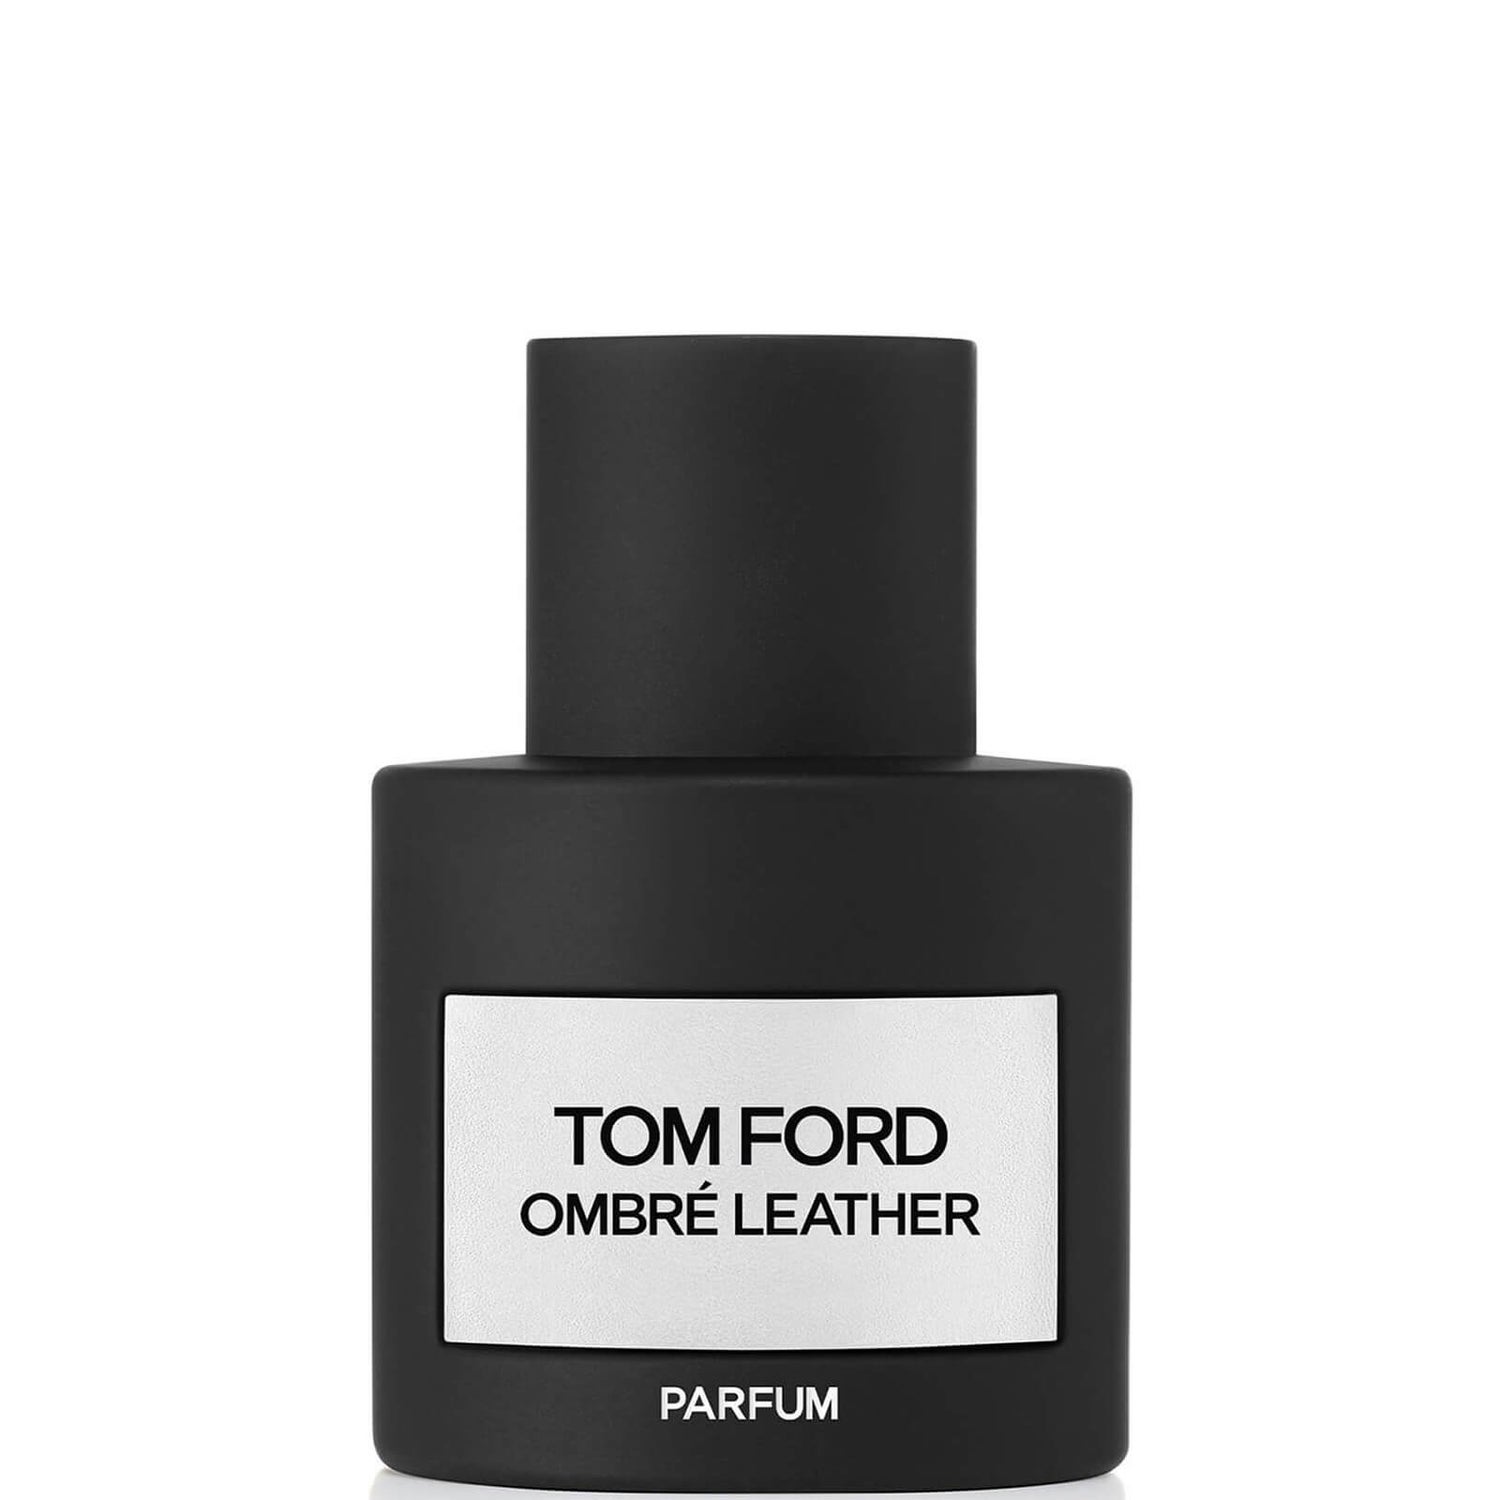 Tom Ford Ombre Leather Parfum 50ml Tom Ford Ombre Leather parfém 50 ml